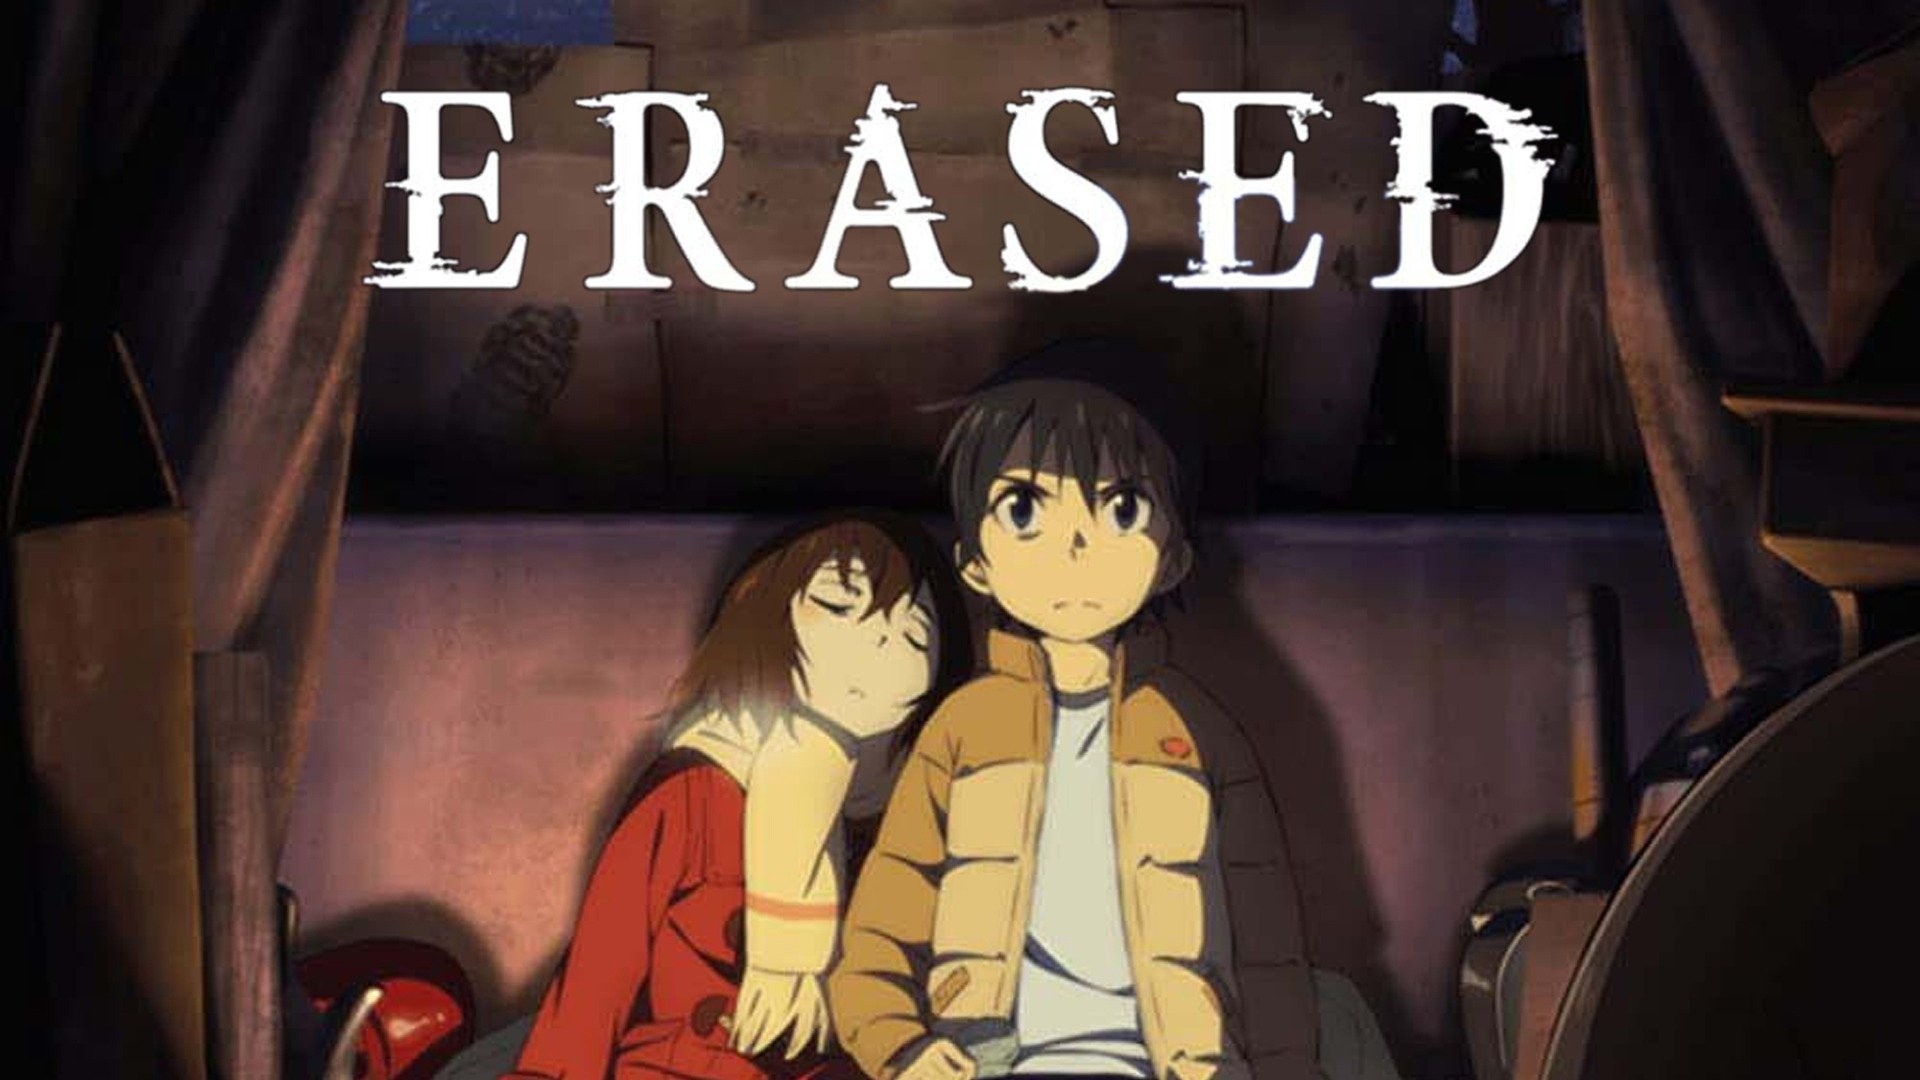 ERASED (2016): ratings and release dates for each episode